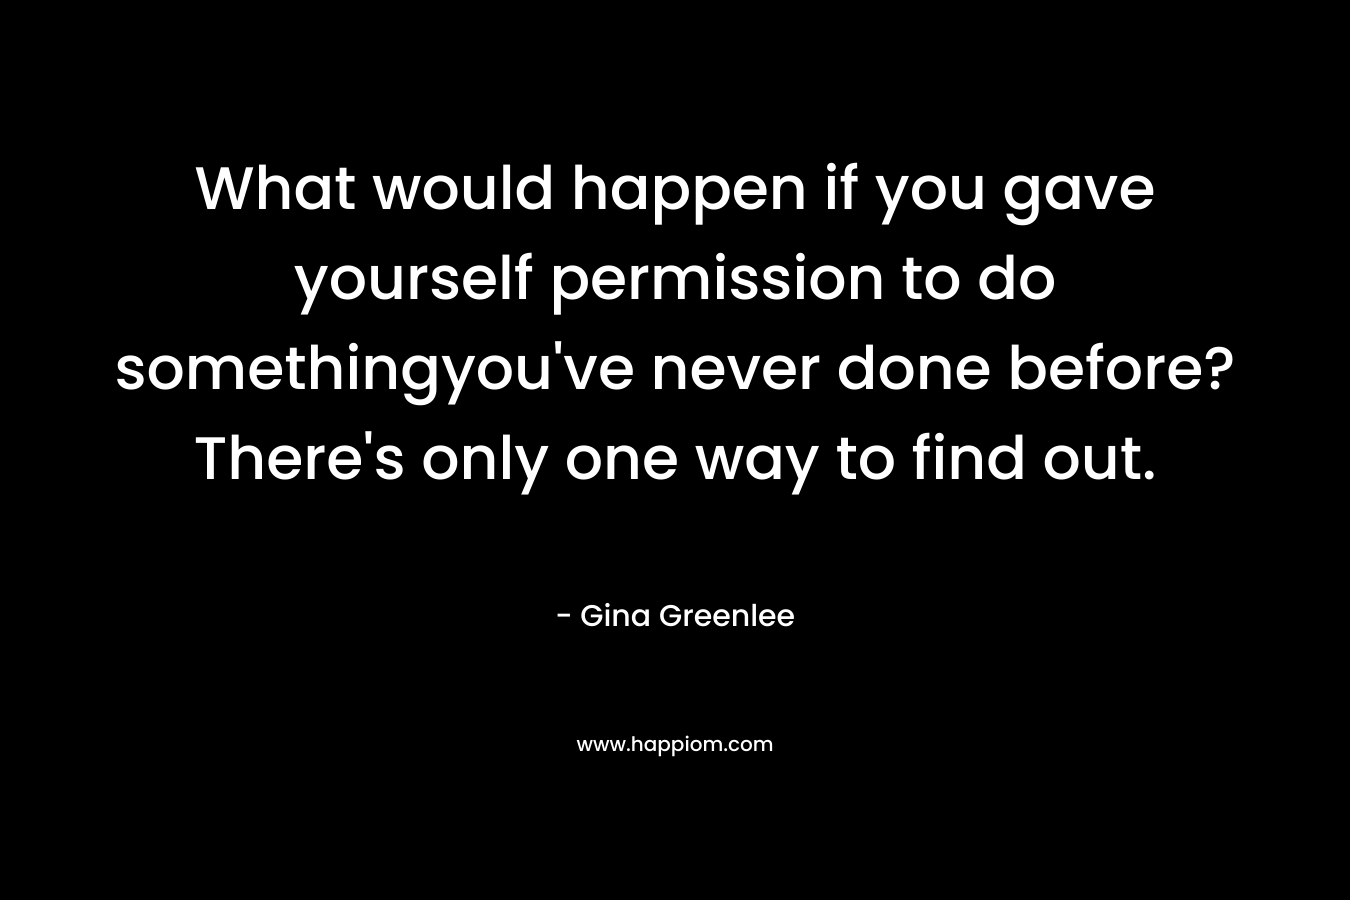 What would happen if you gave yourself permission to do somethingyou've never done before? There's only one way to find out.